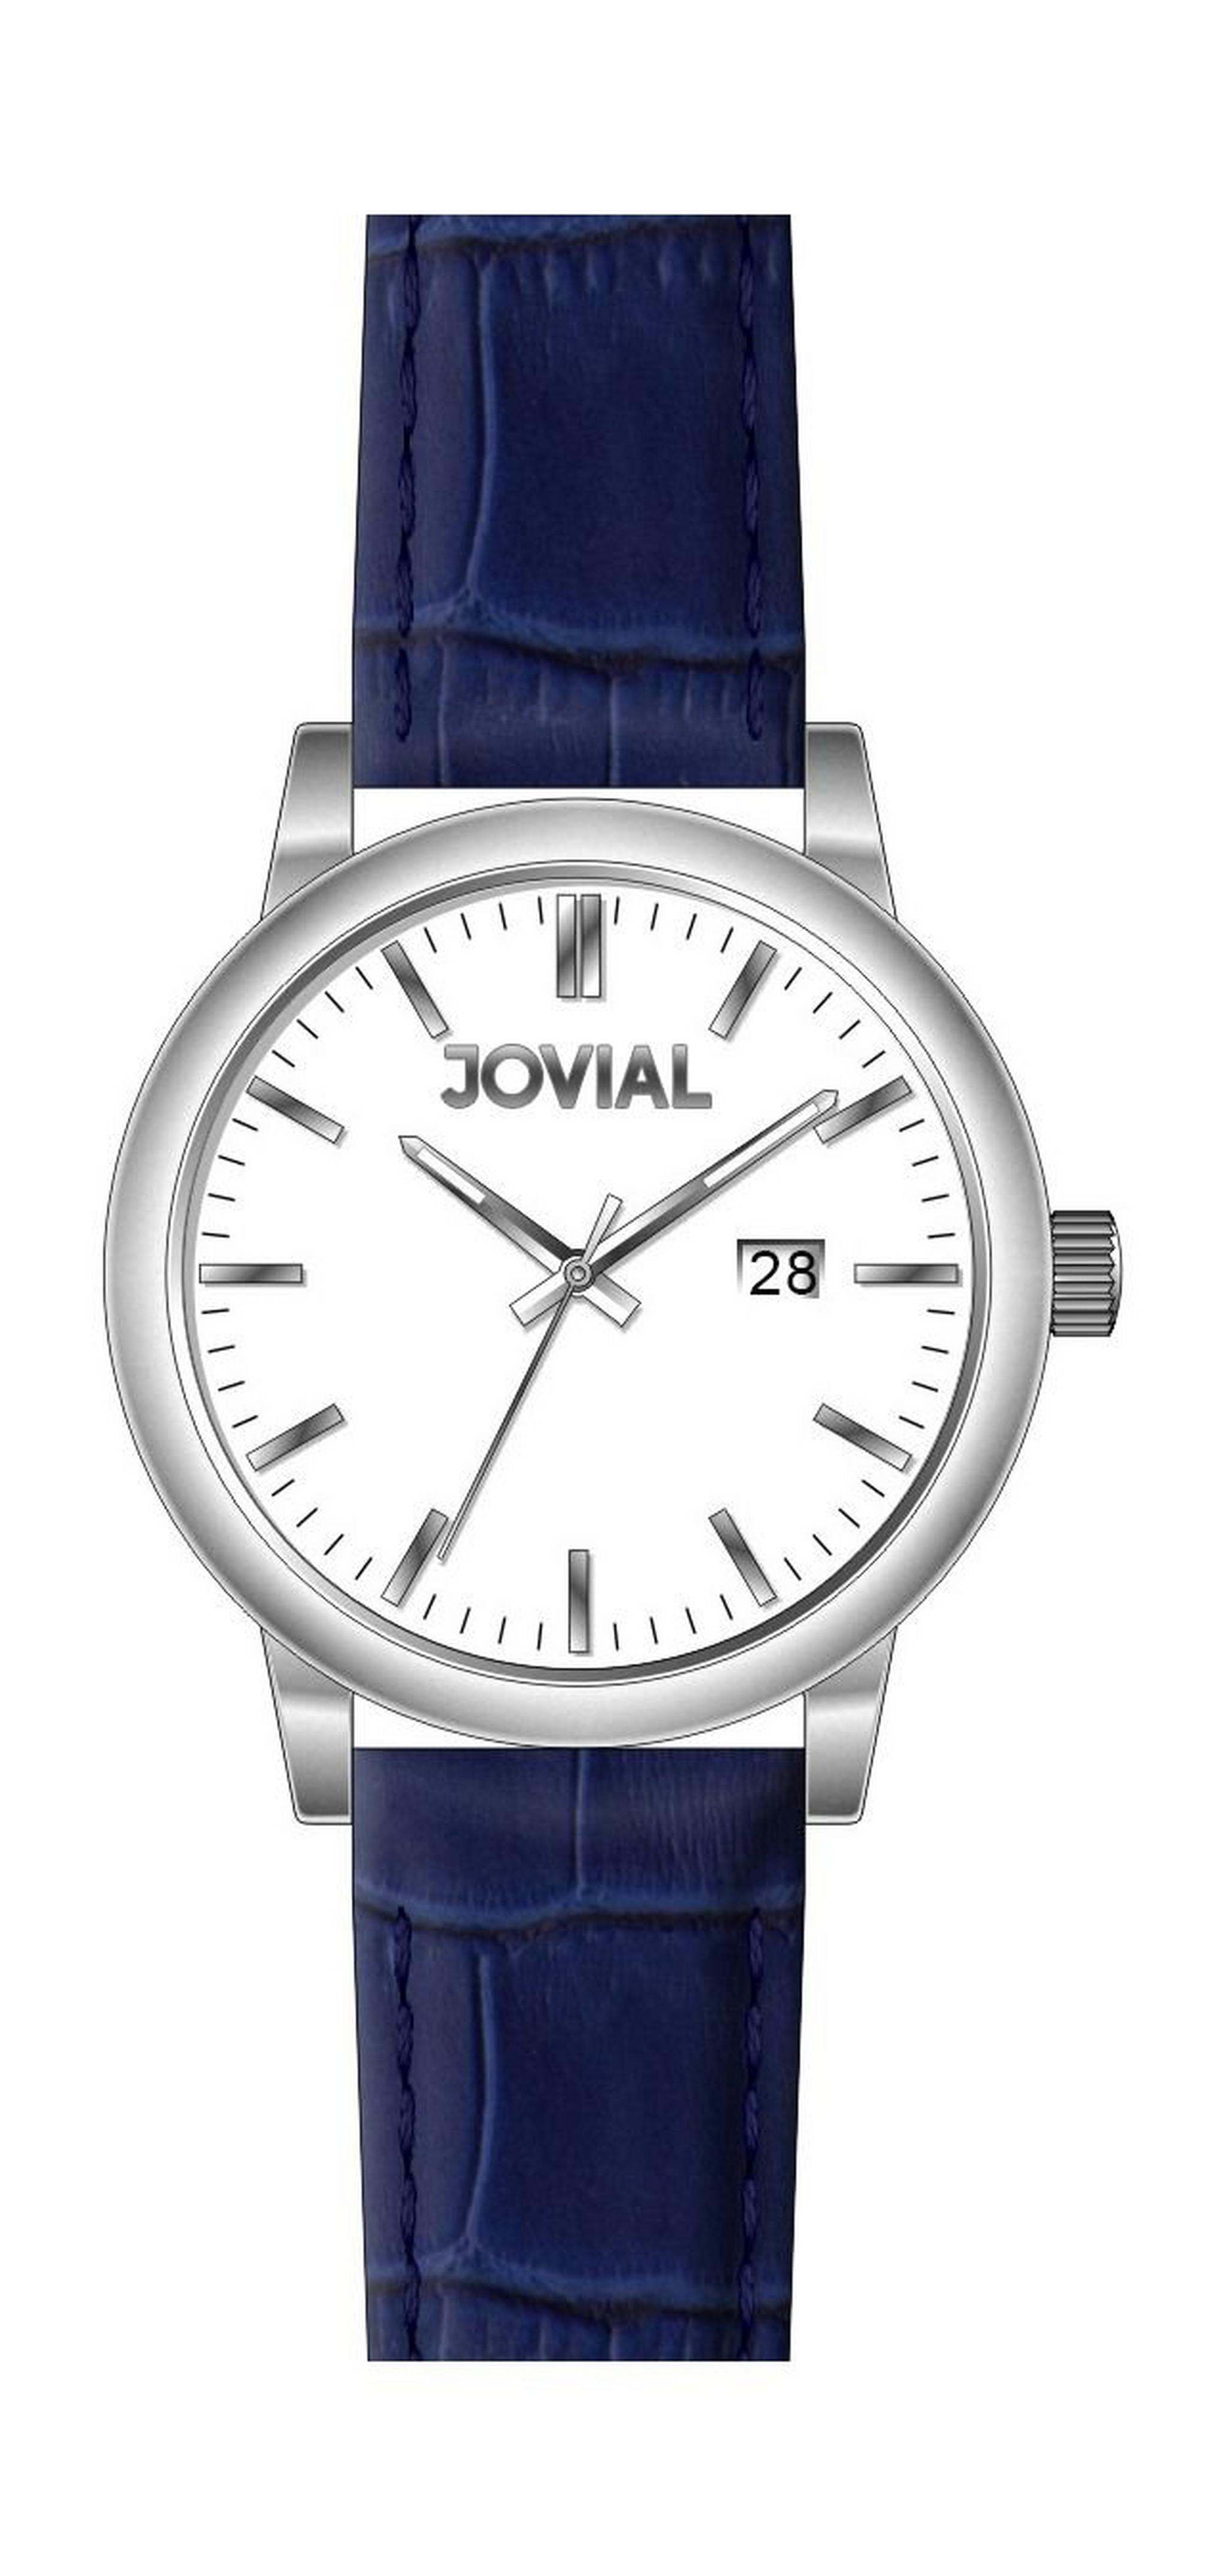 Jovial GS2009-51 Casual Analog Gents Watch – Leather Strap – Blue